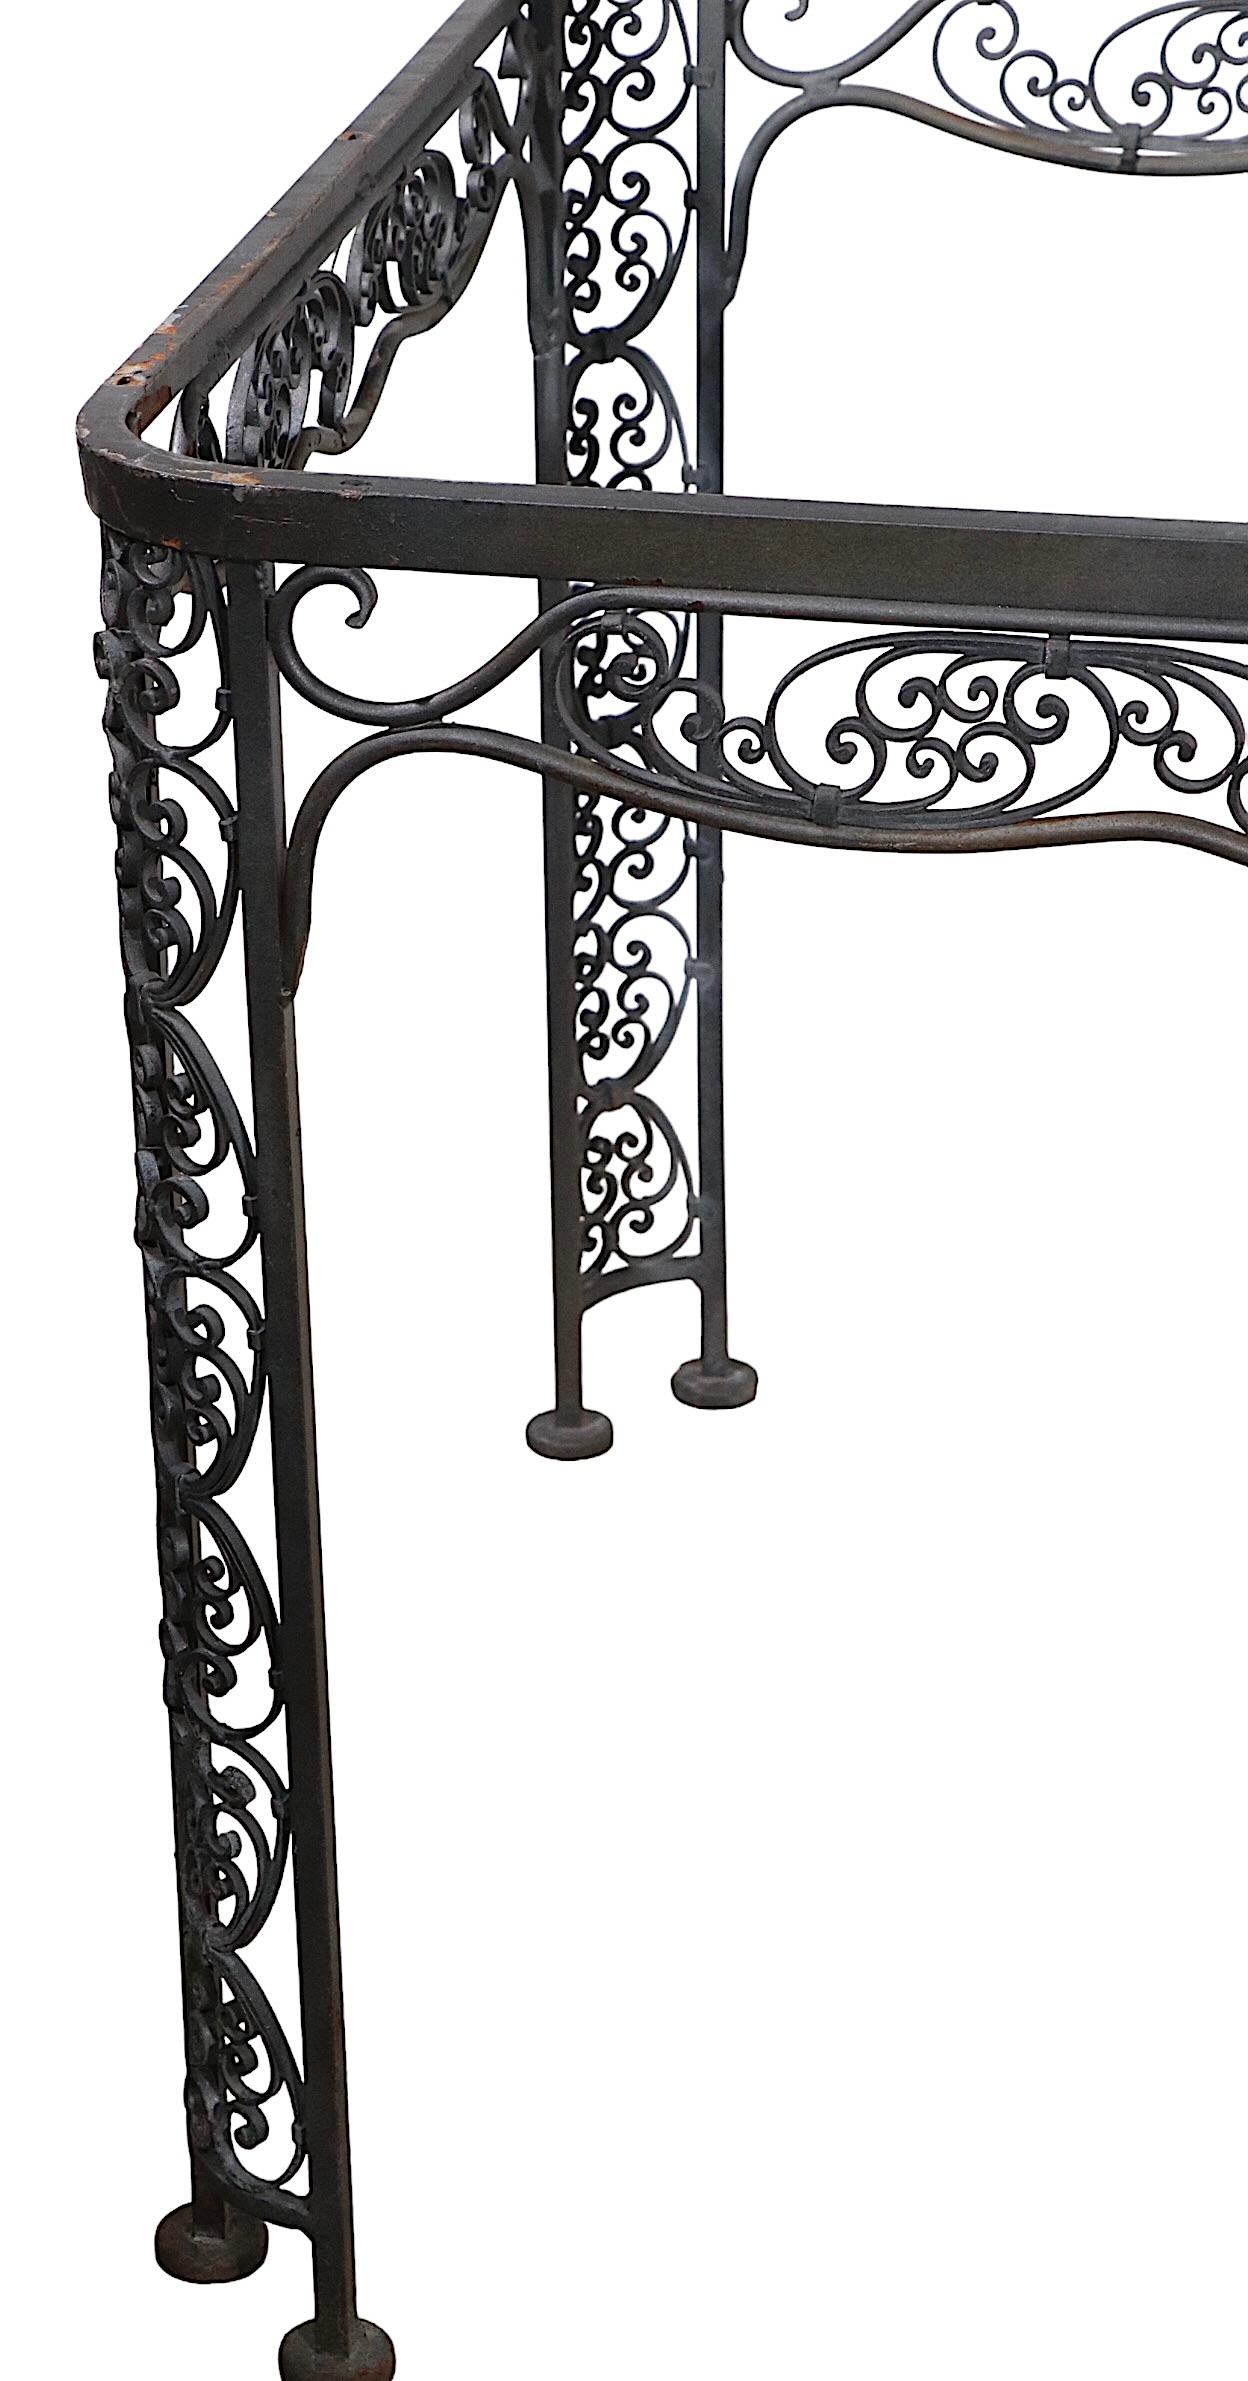 Ornate Wrought Iron Garden Patio Poolside Dining Table by Lee Woodard, c 1940's For Sale 5